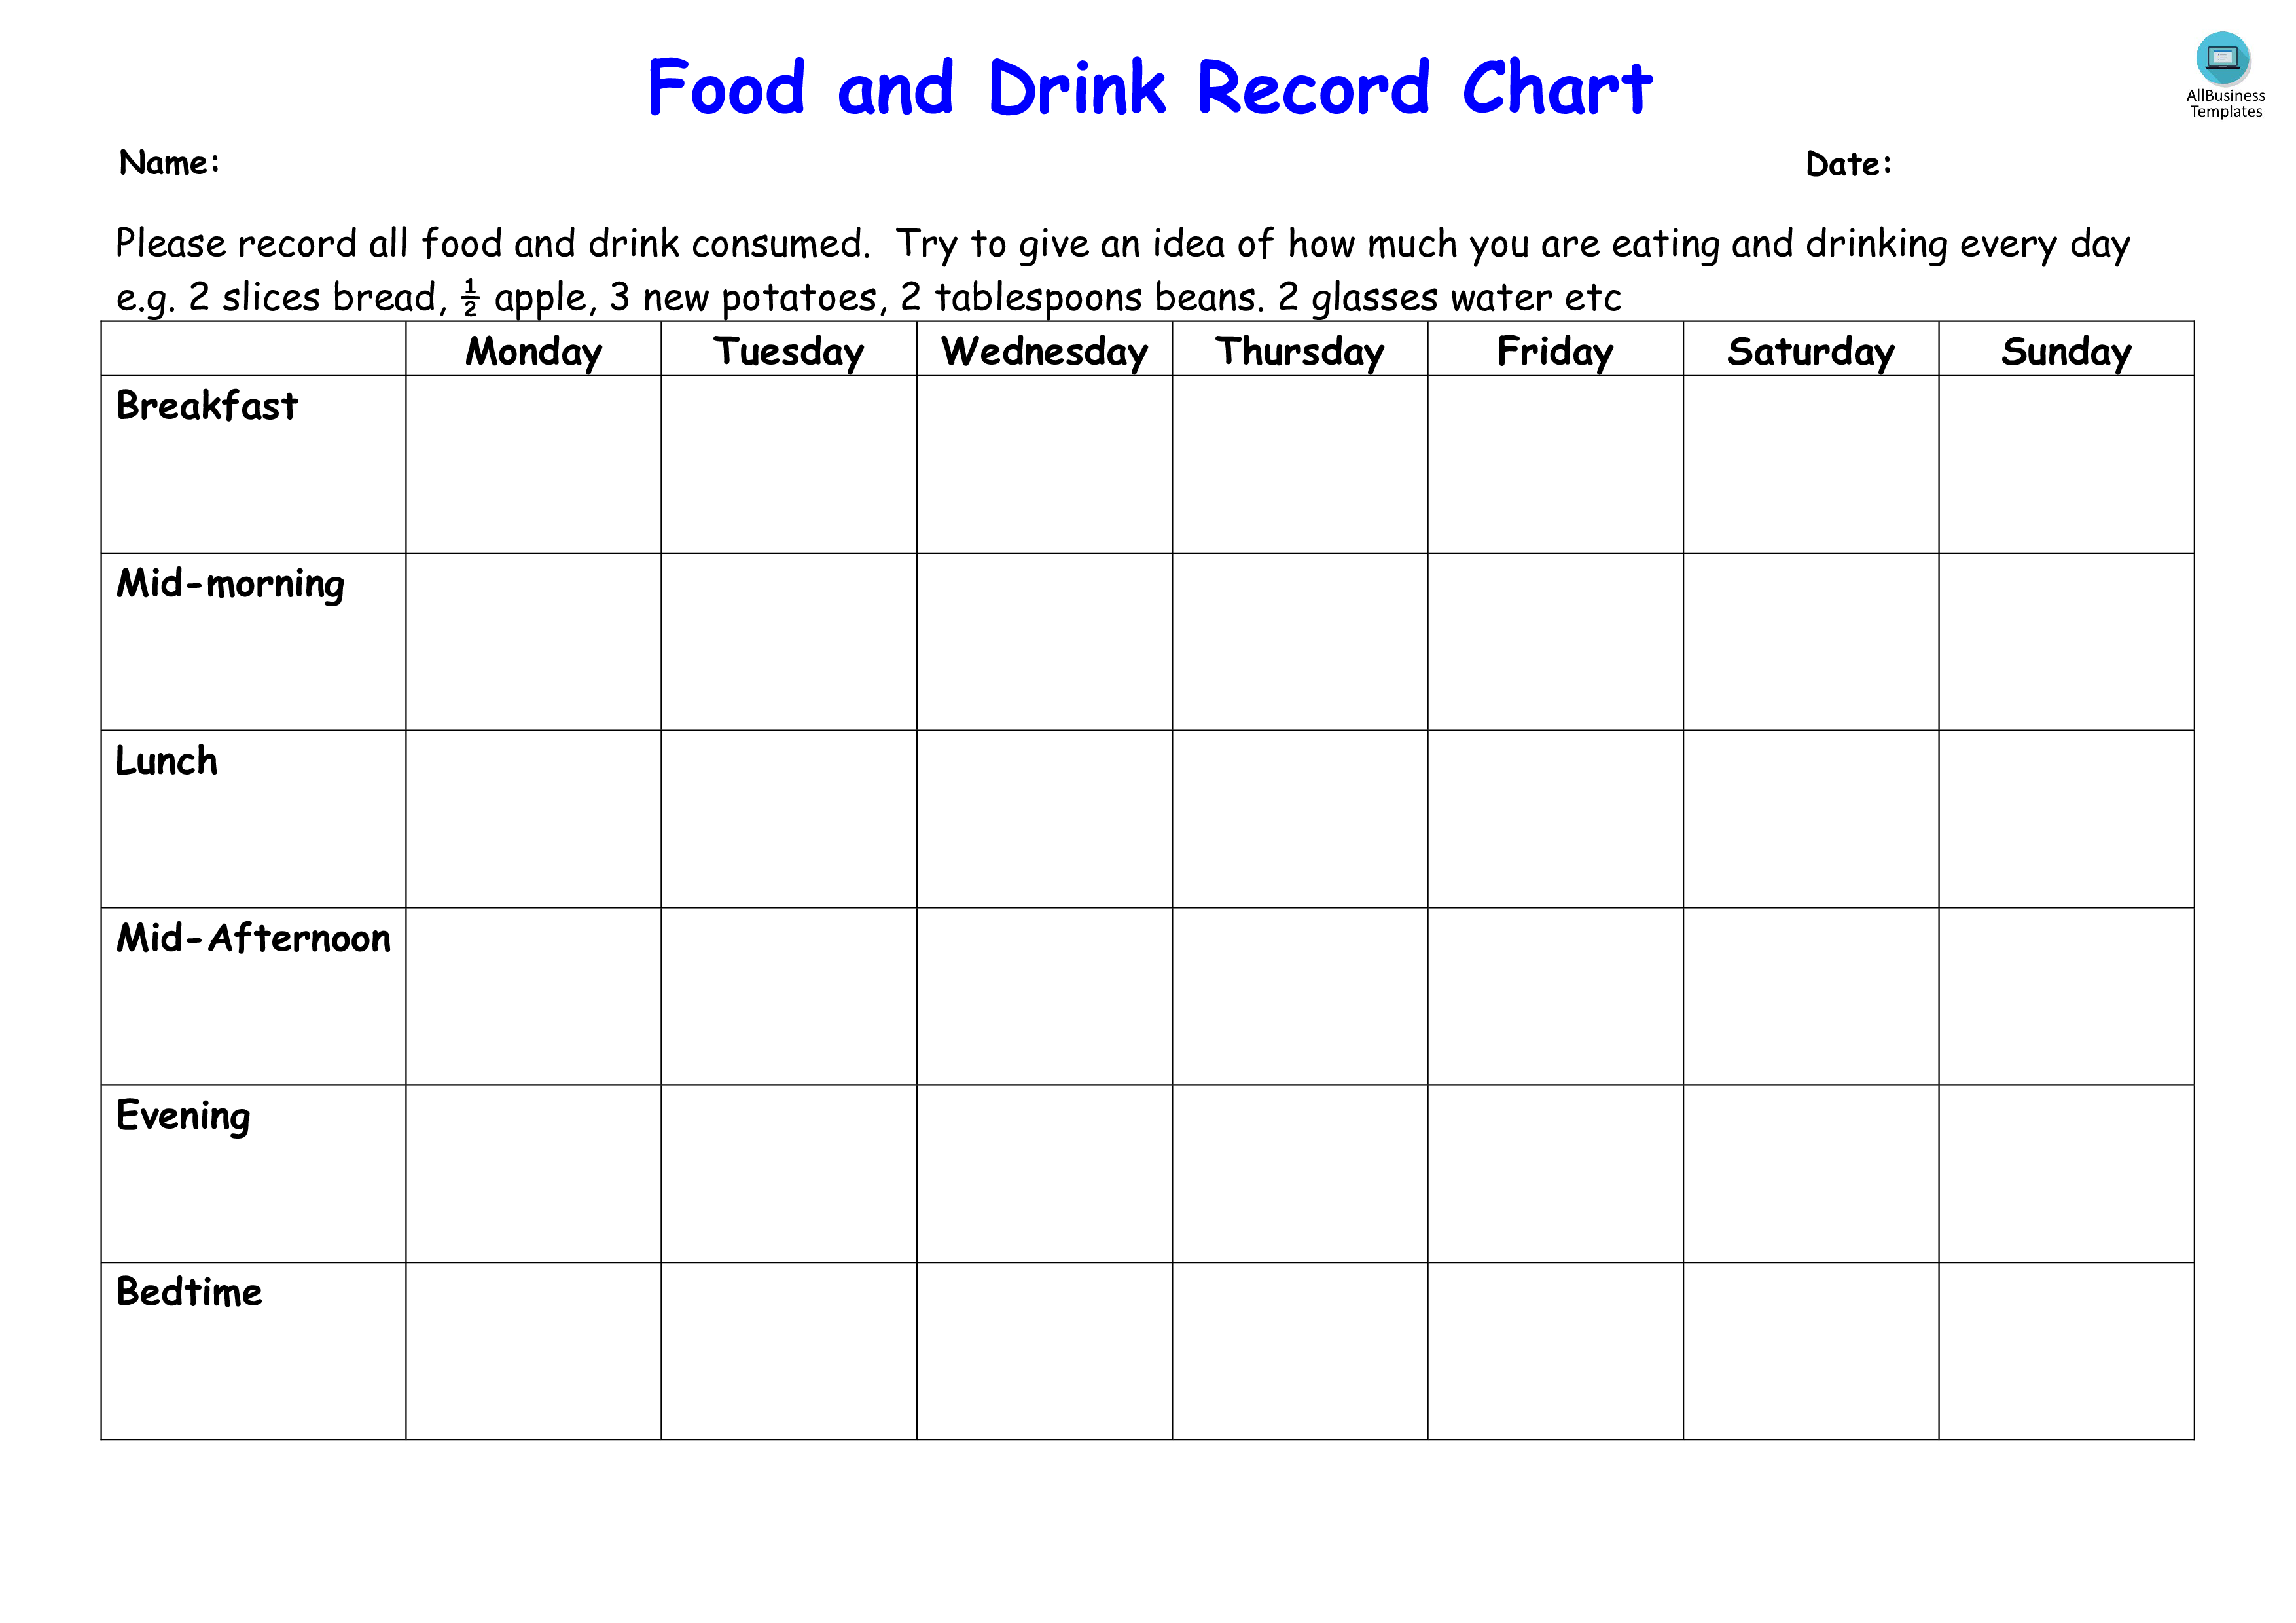 Food and Drink Record Chart 模板